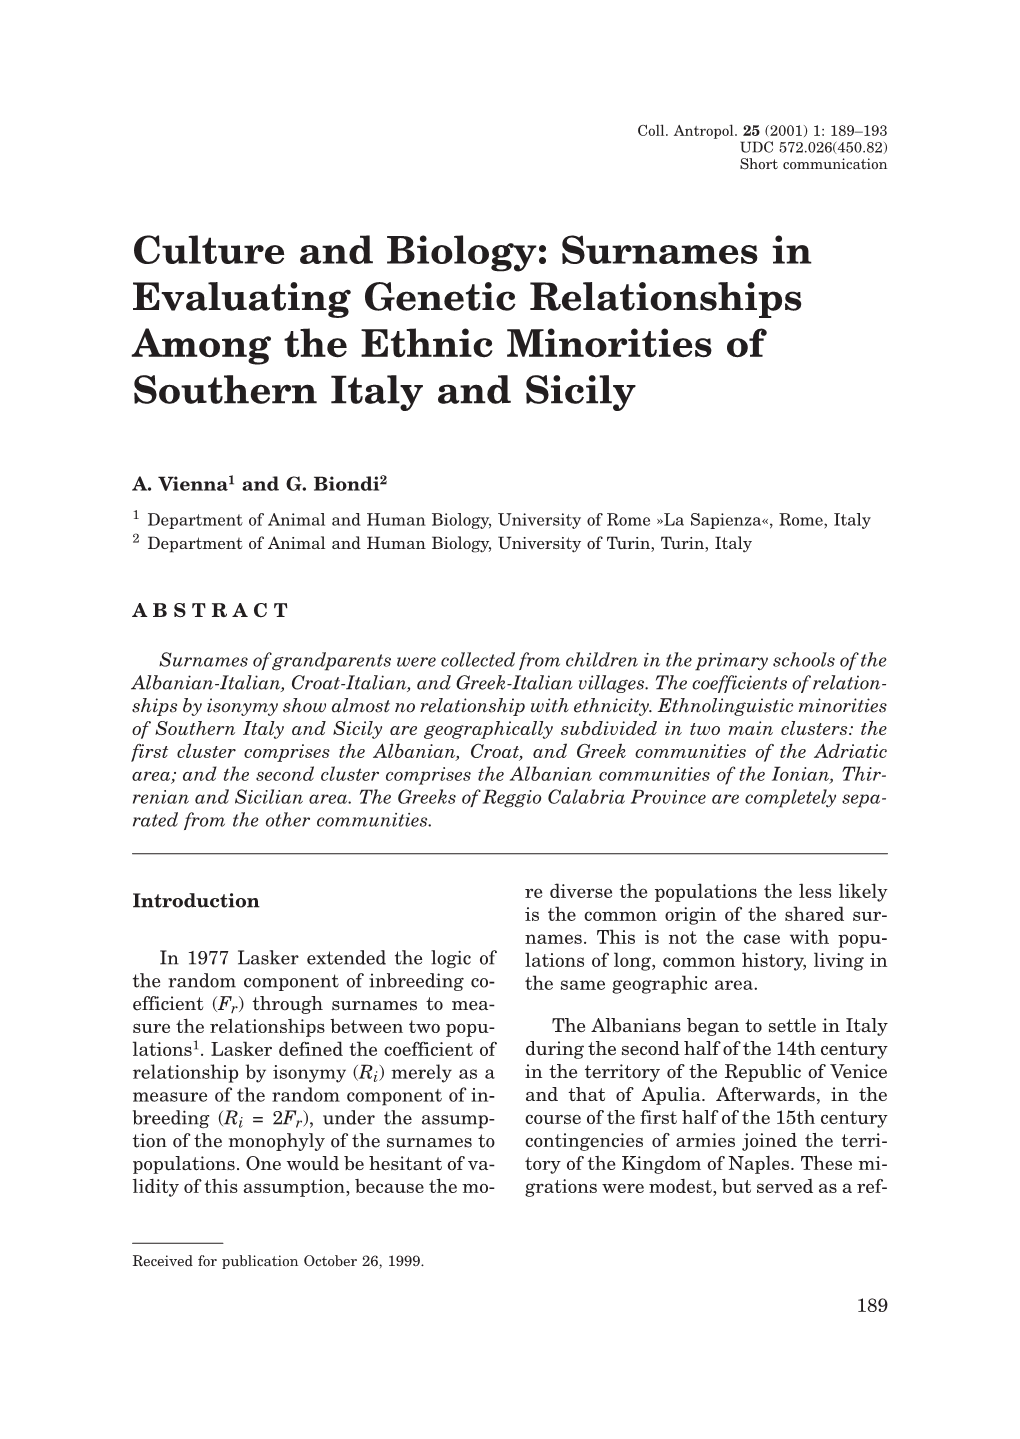 Surnames in Evaluating Genetic Relationships Among the Ethnic Minorities of Southern Italy and Sicily